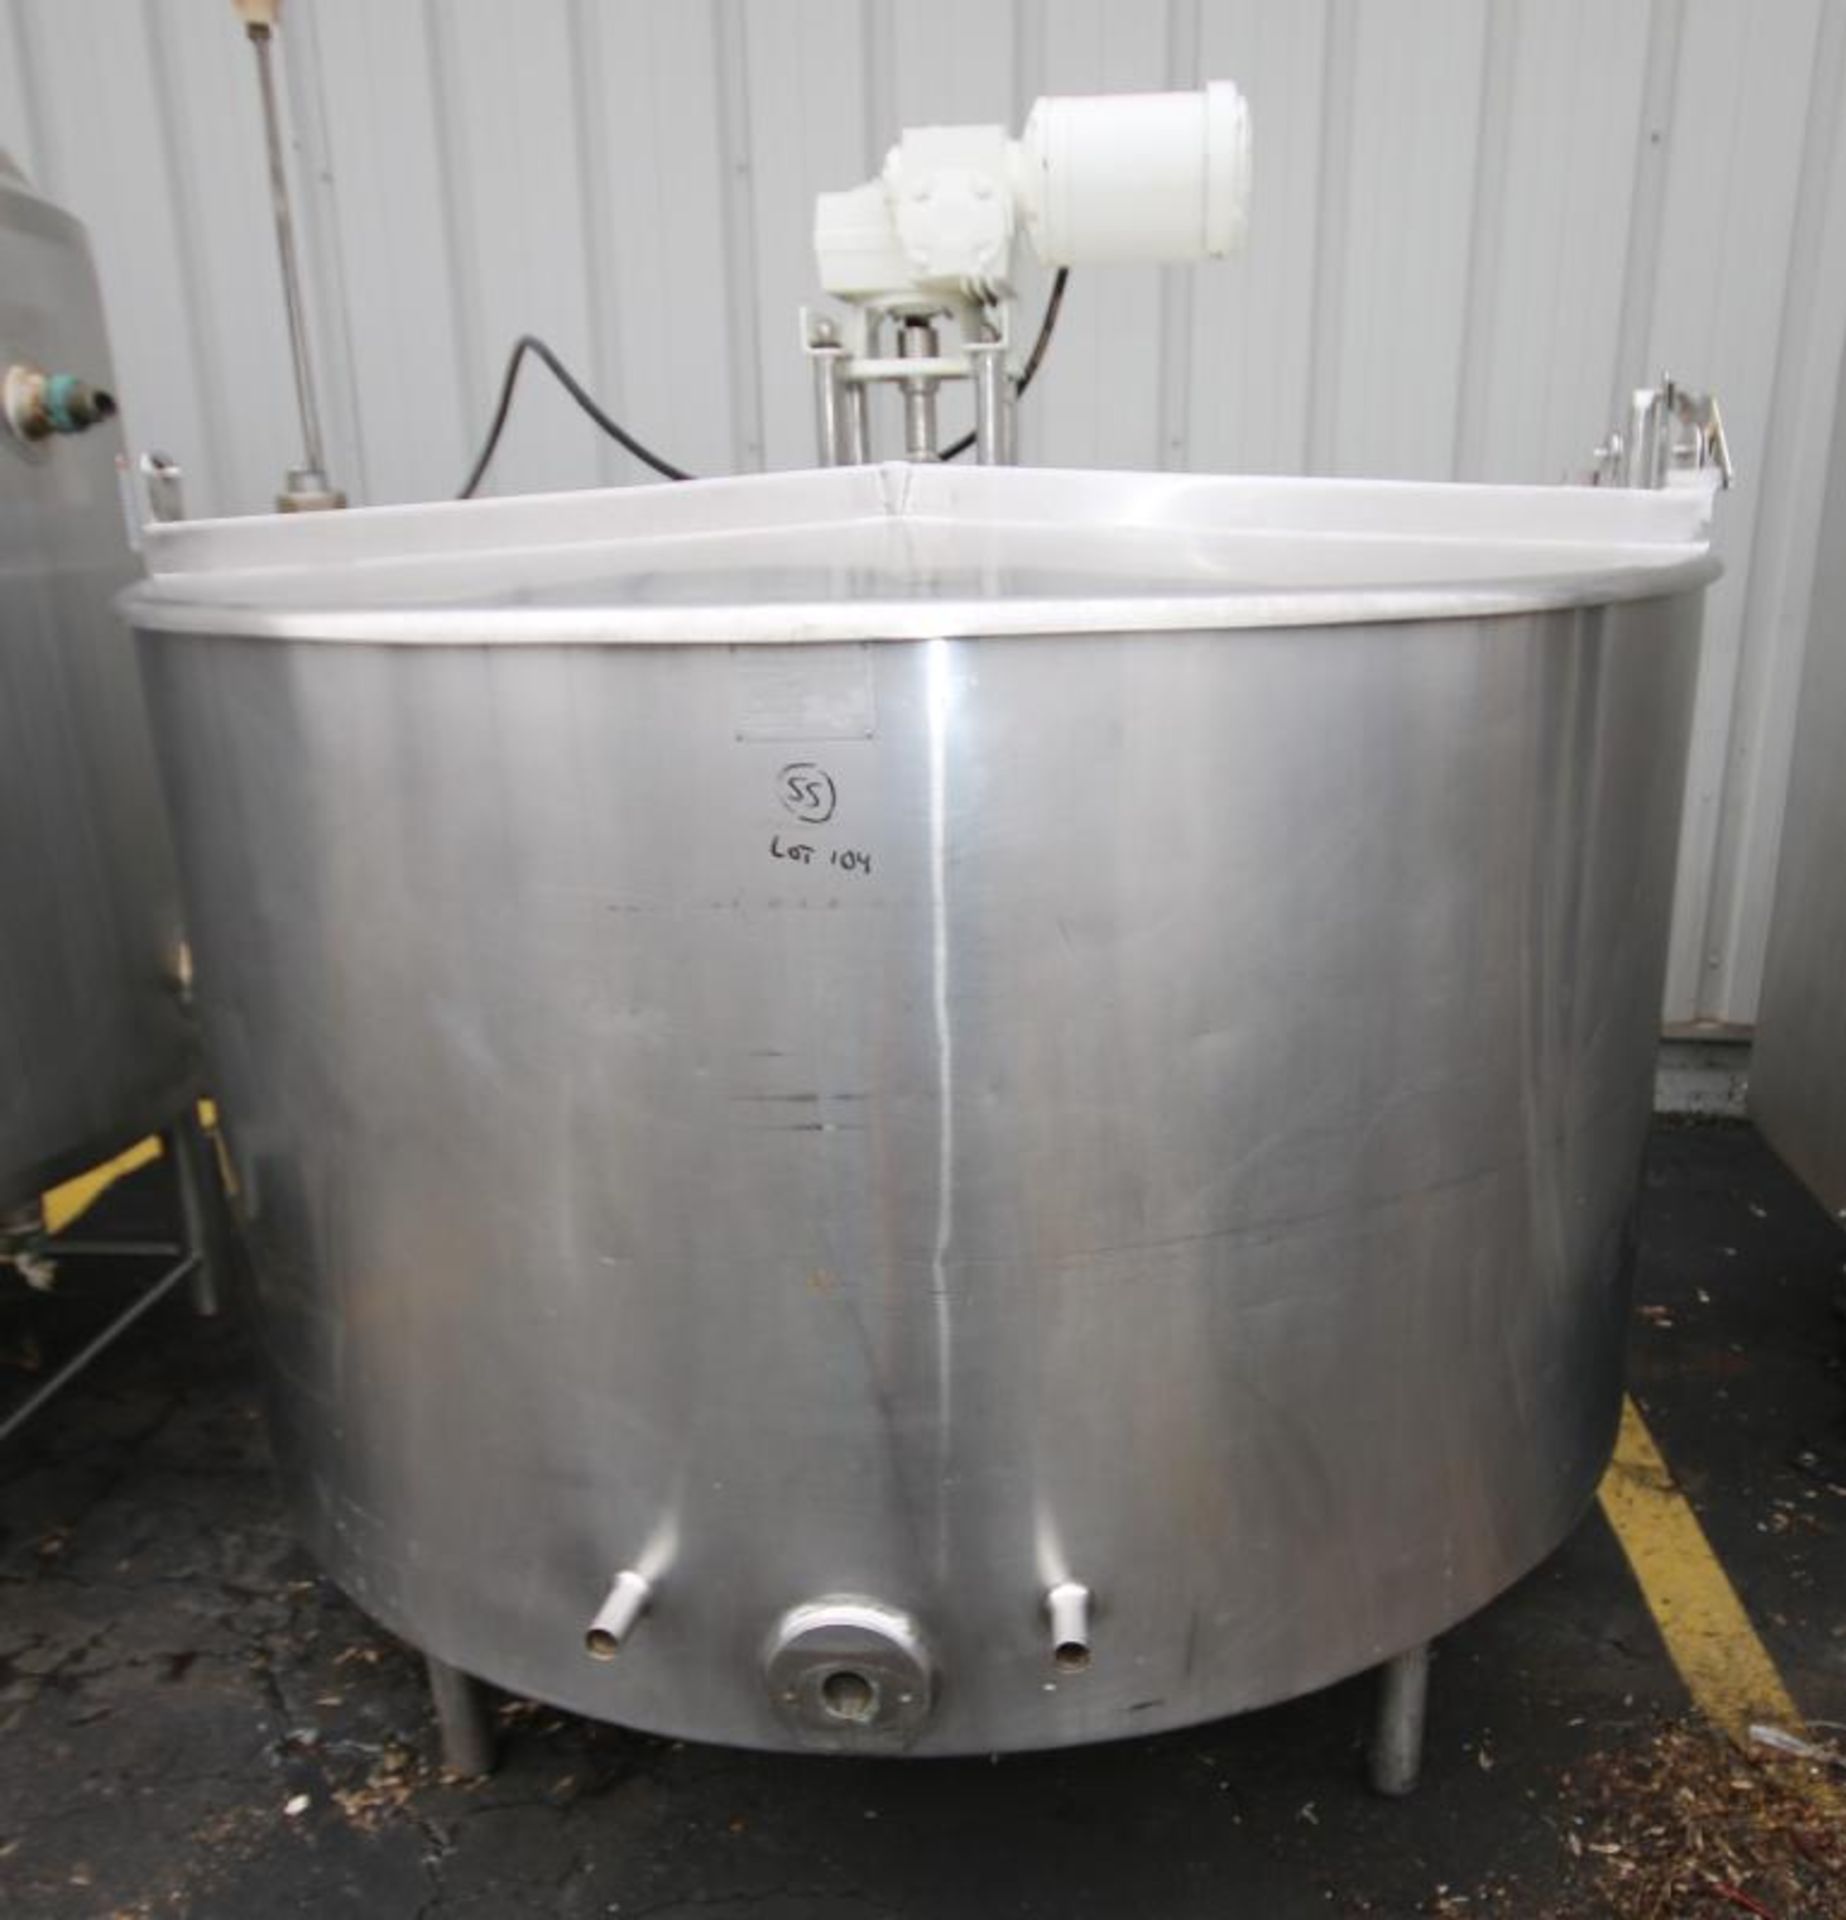 Chester Jensen 500 Gal. Hinged Lid Jacketed S/S Tank, SN EBP-167-DS, with 1.5 hp Agitator, 208 - 220